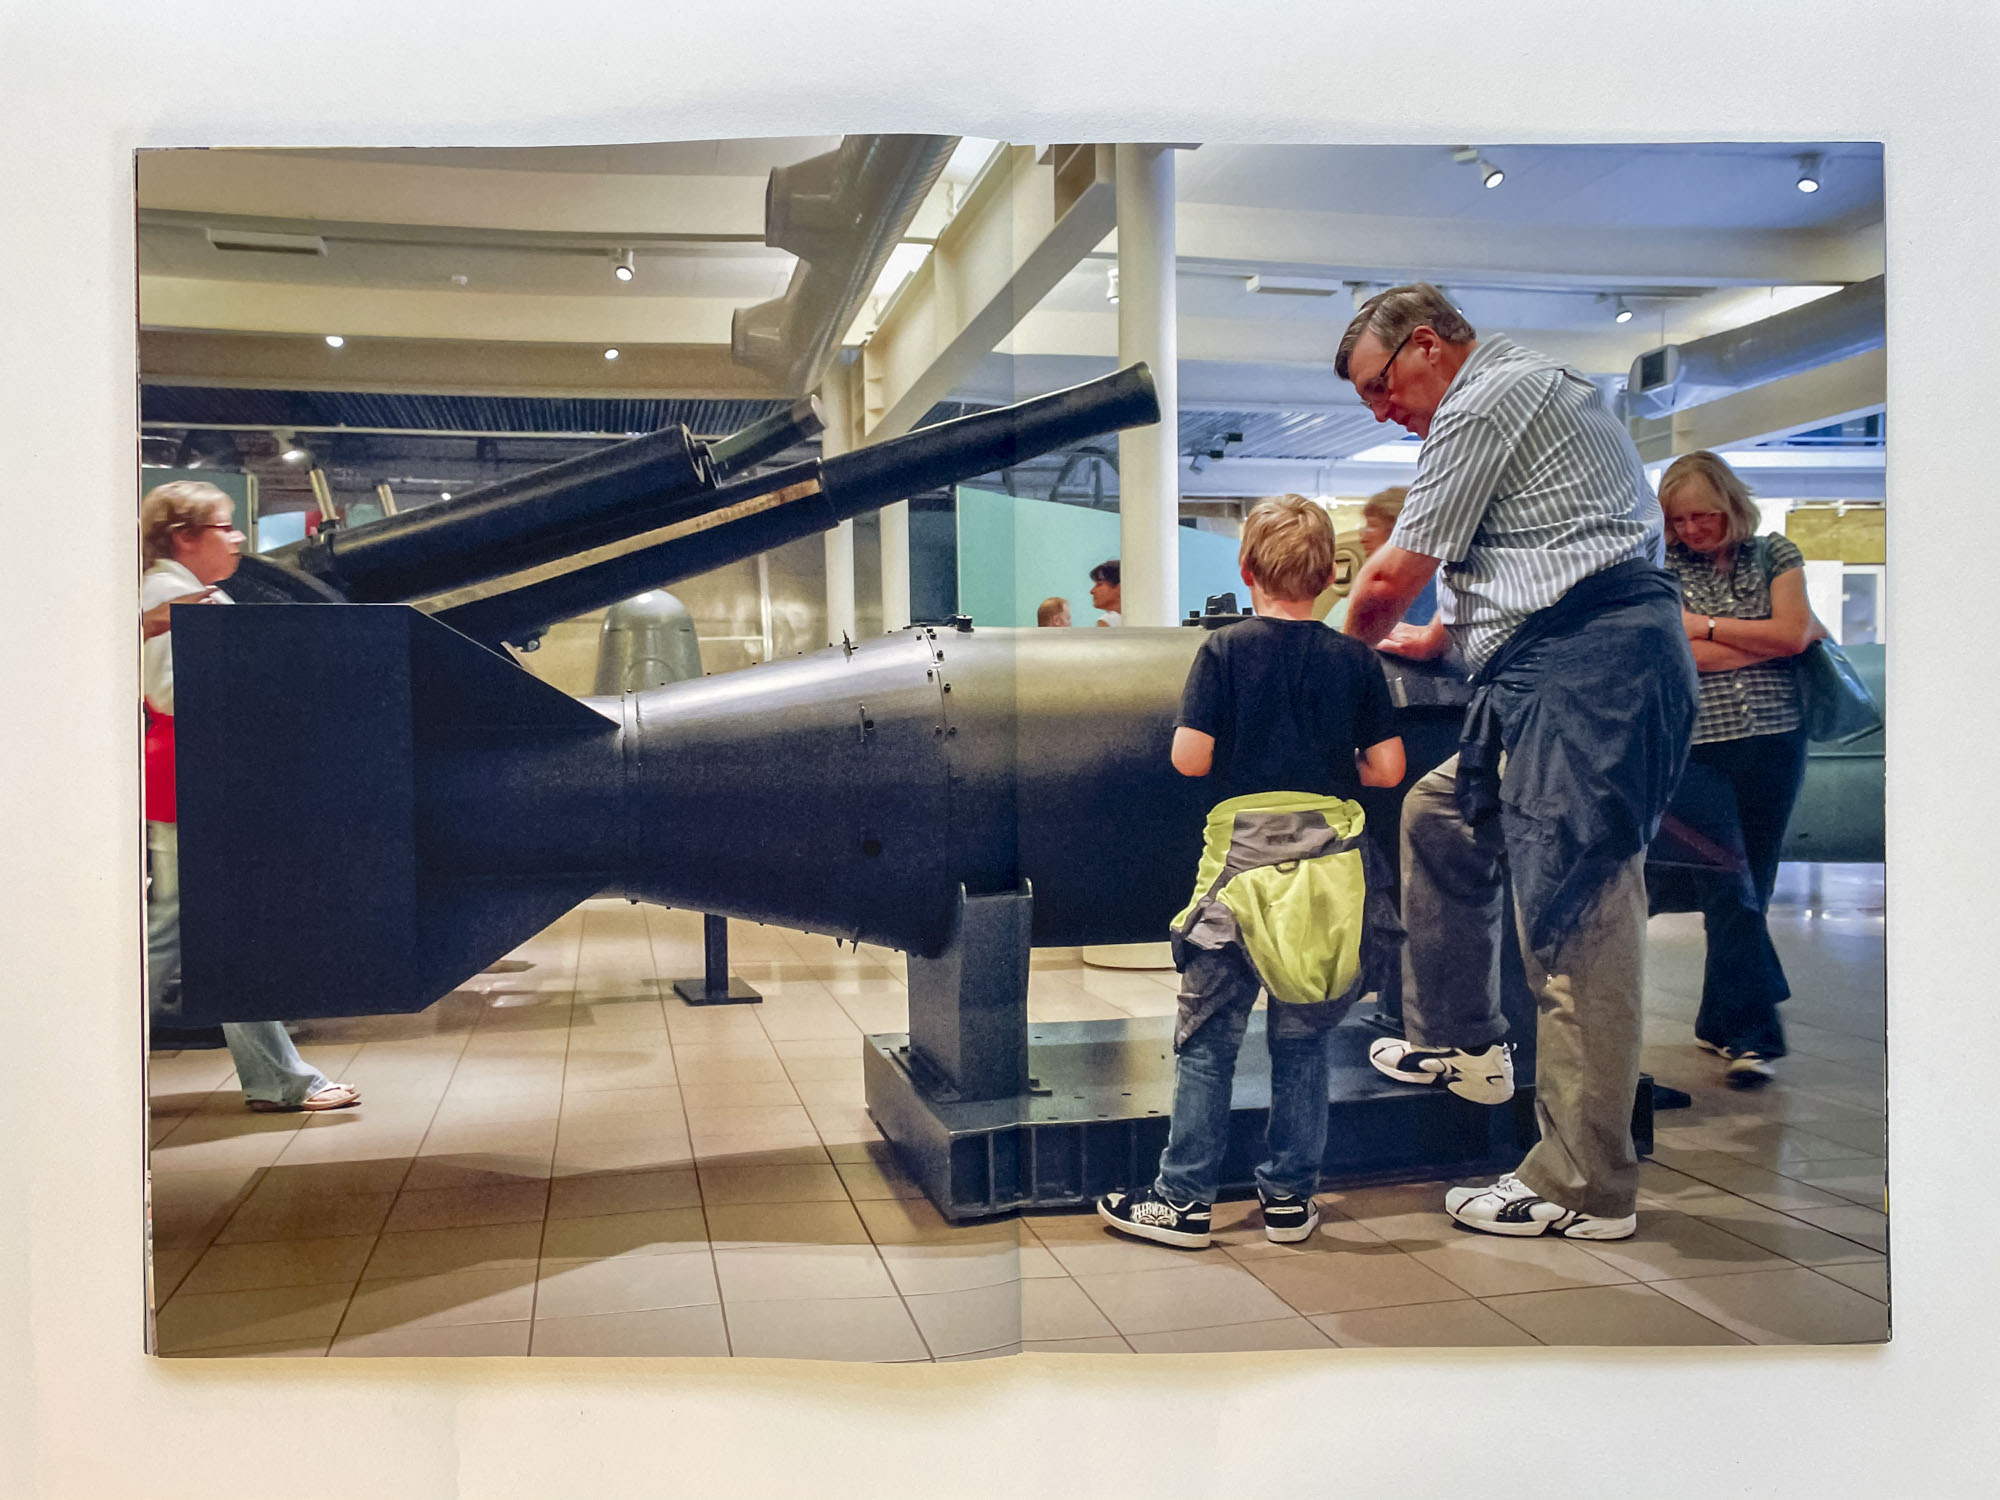 a large black bomb stands in a museum, a grandfather explains something to his young grandson while leaning on it